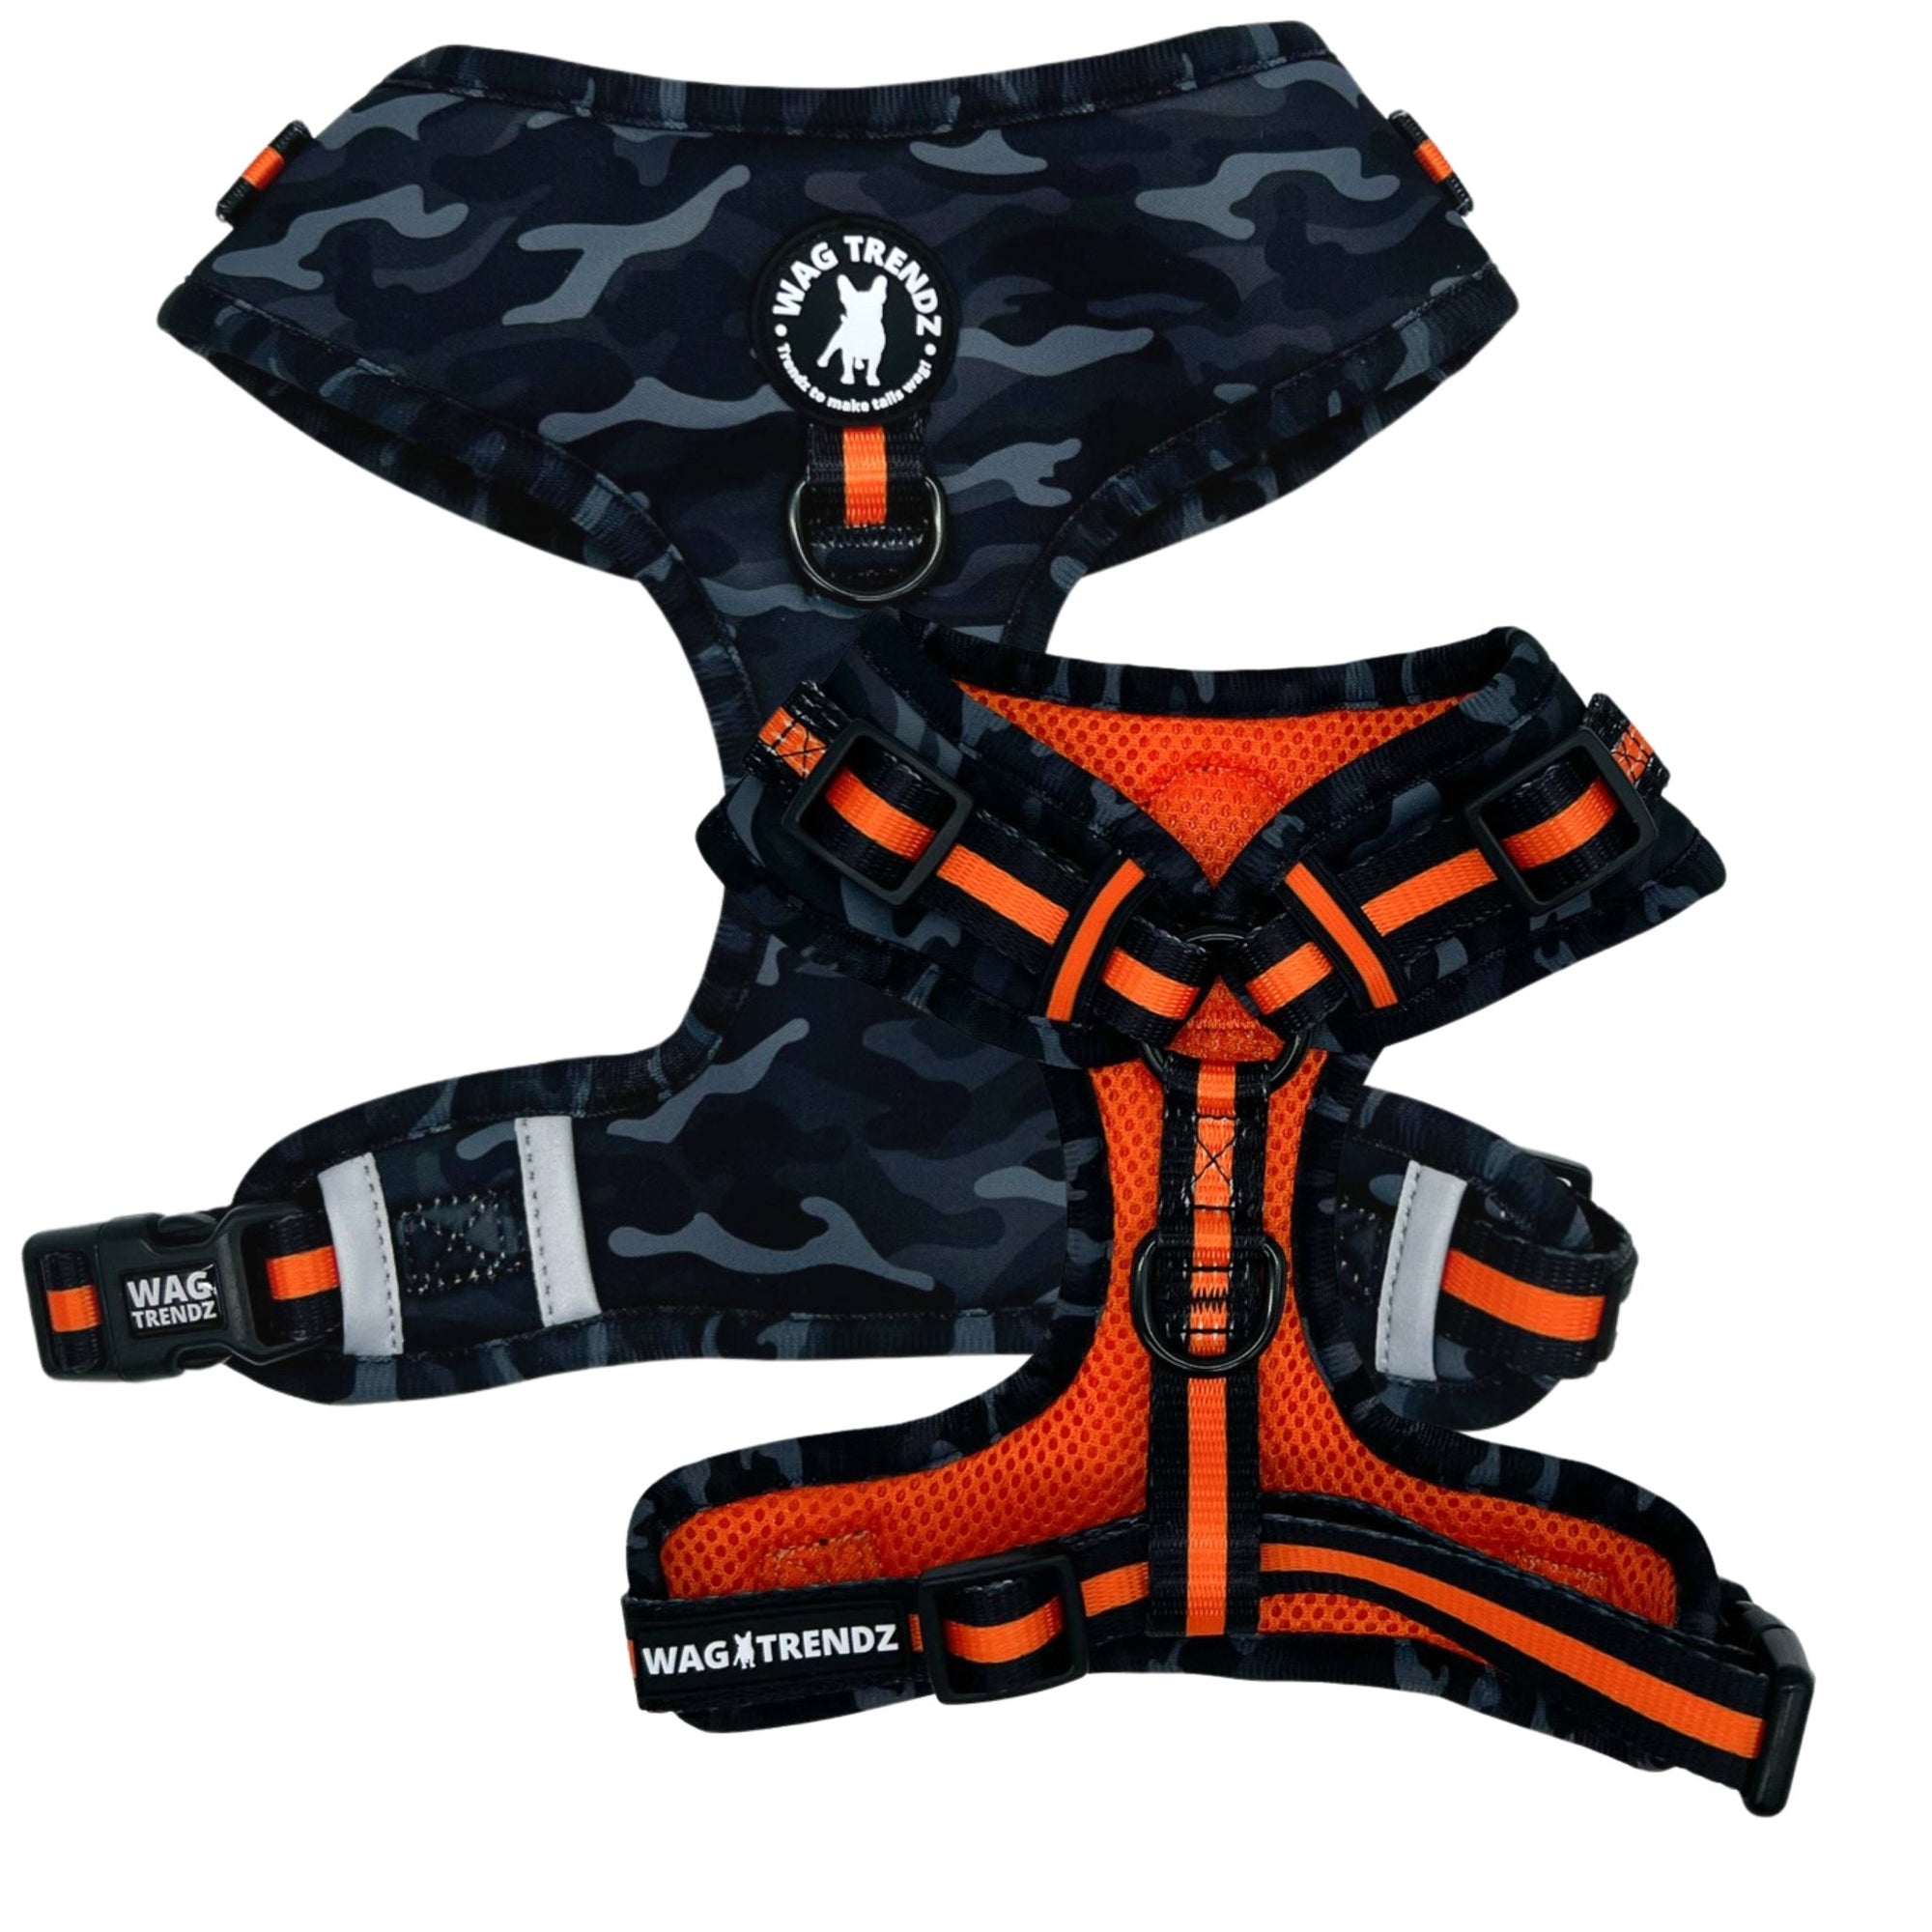 Dog Harness Vest - black and gray camo dog adjustable harness with front clip and orange accents - front &amp; back view - Wag Trendz